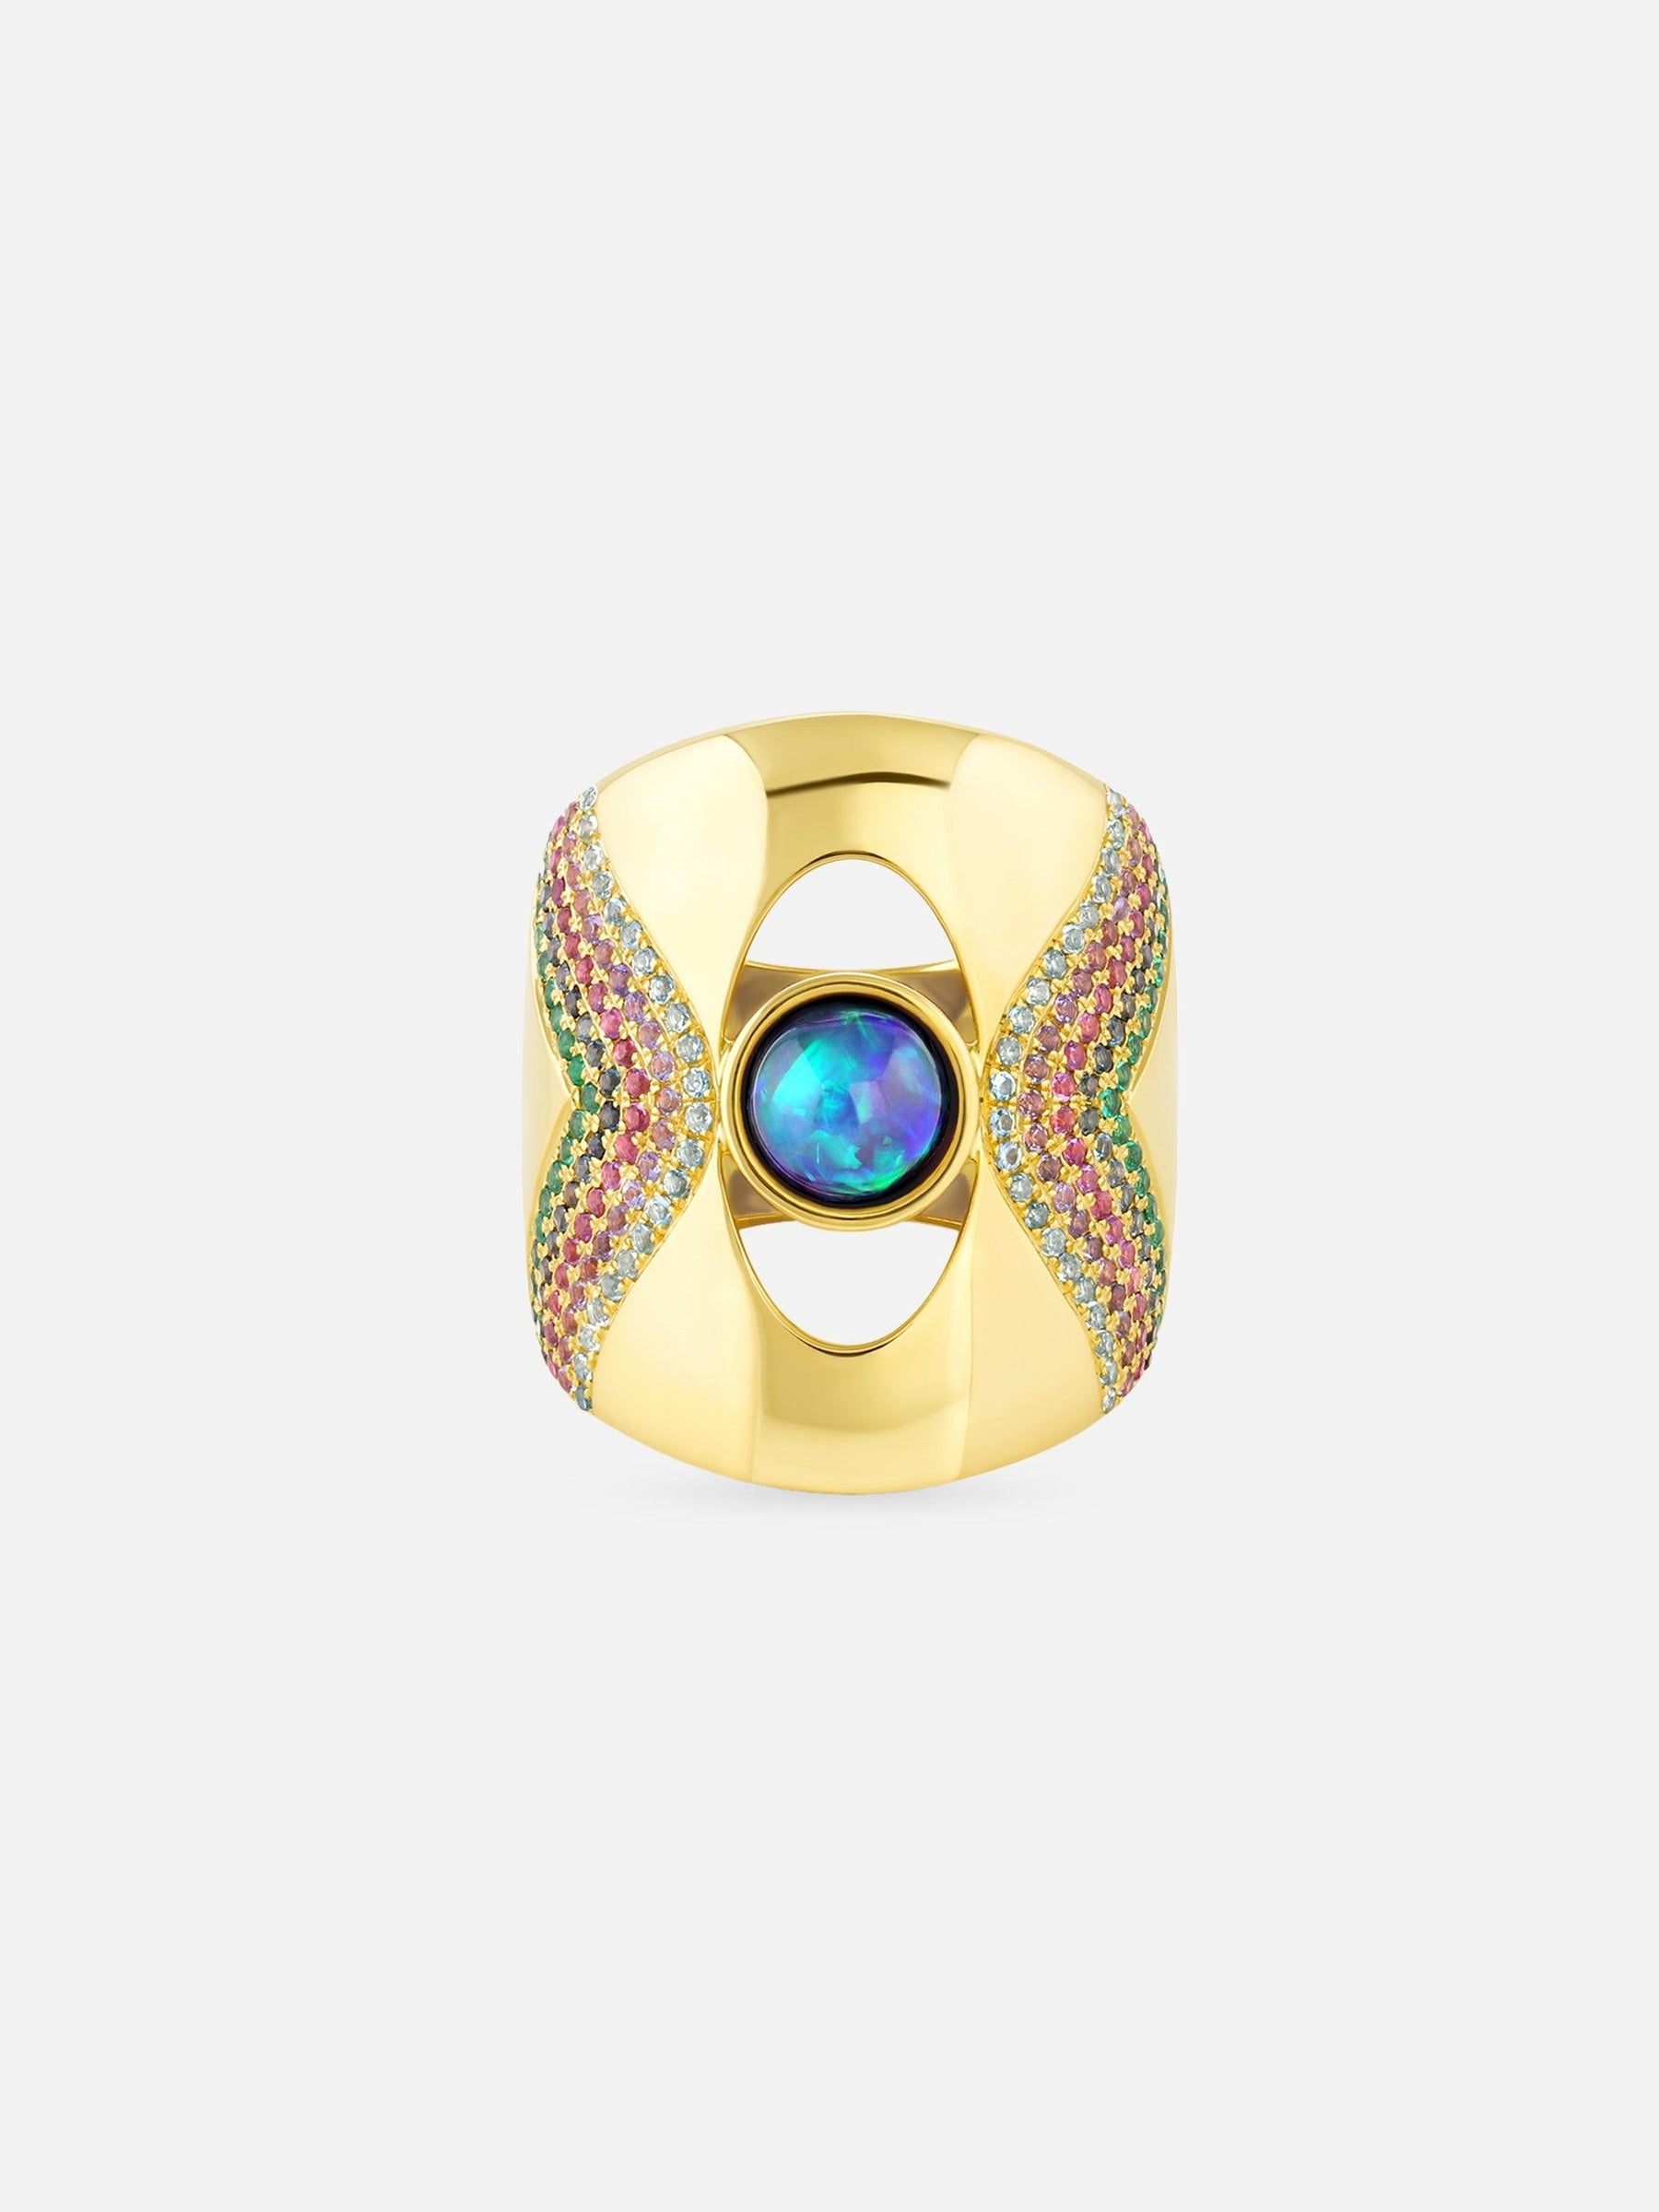 Color Wave Mood Ring - Jennifer DeMoro Jewelry - At Present